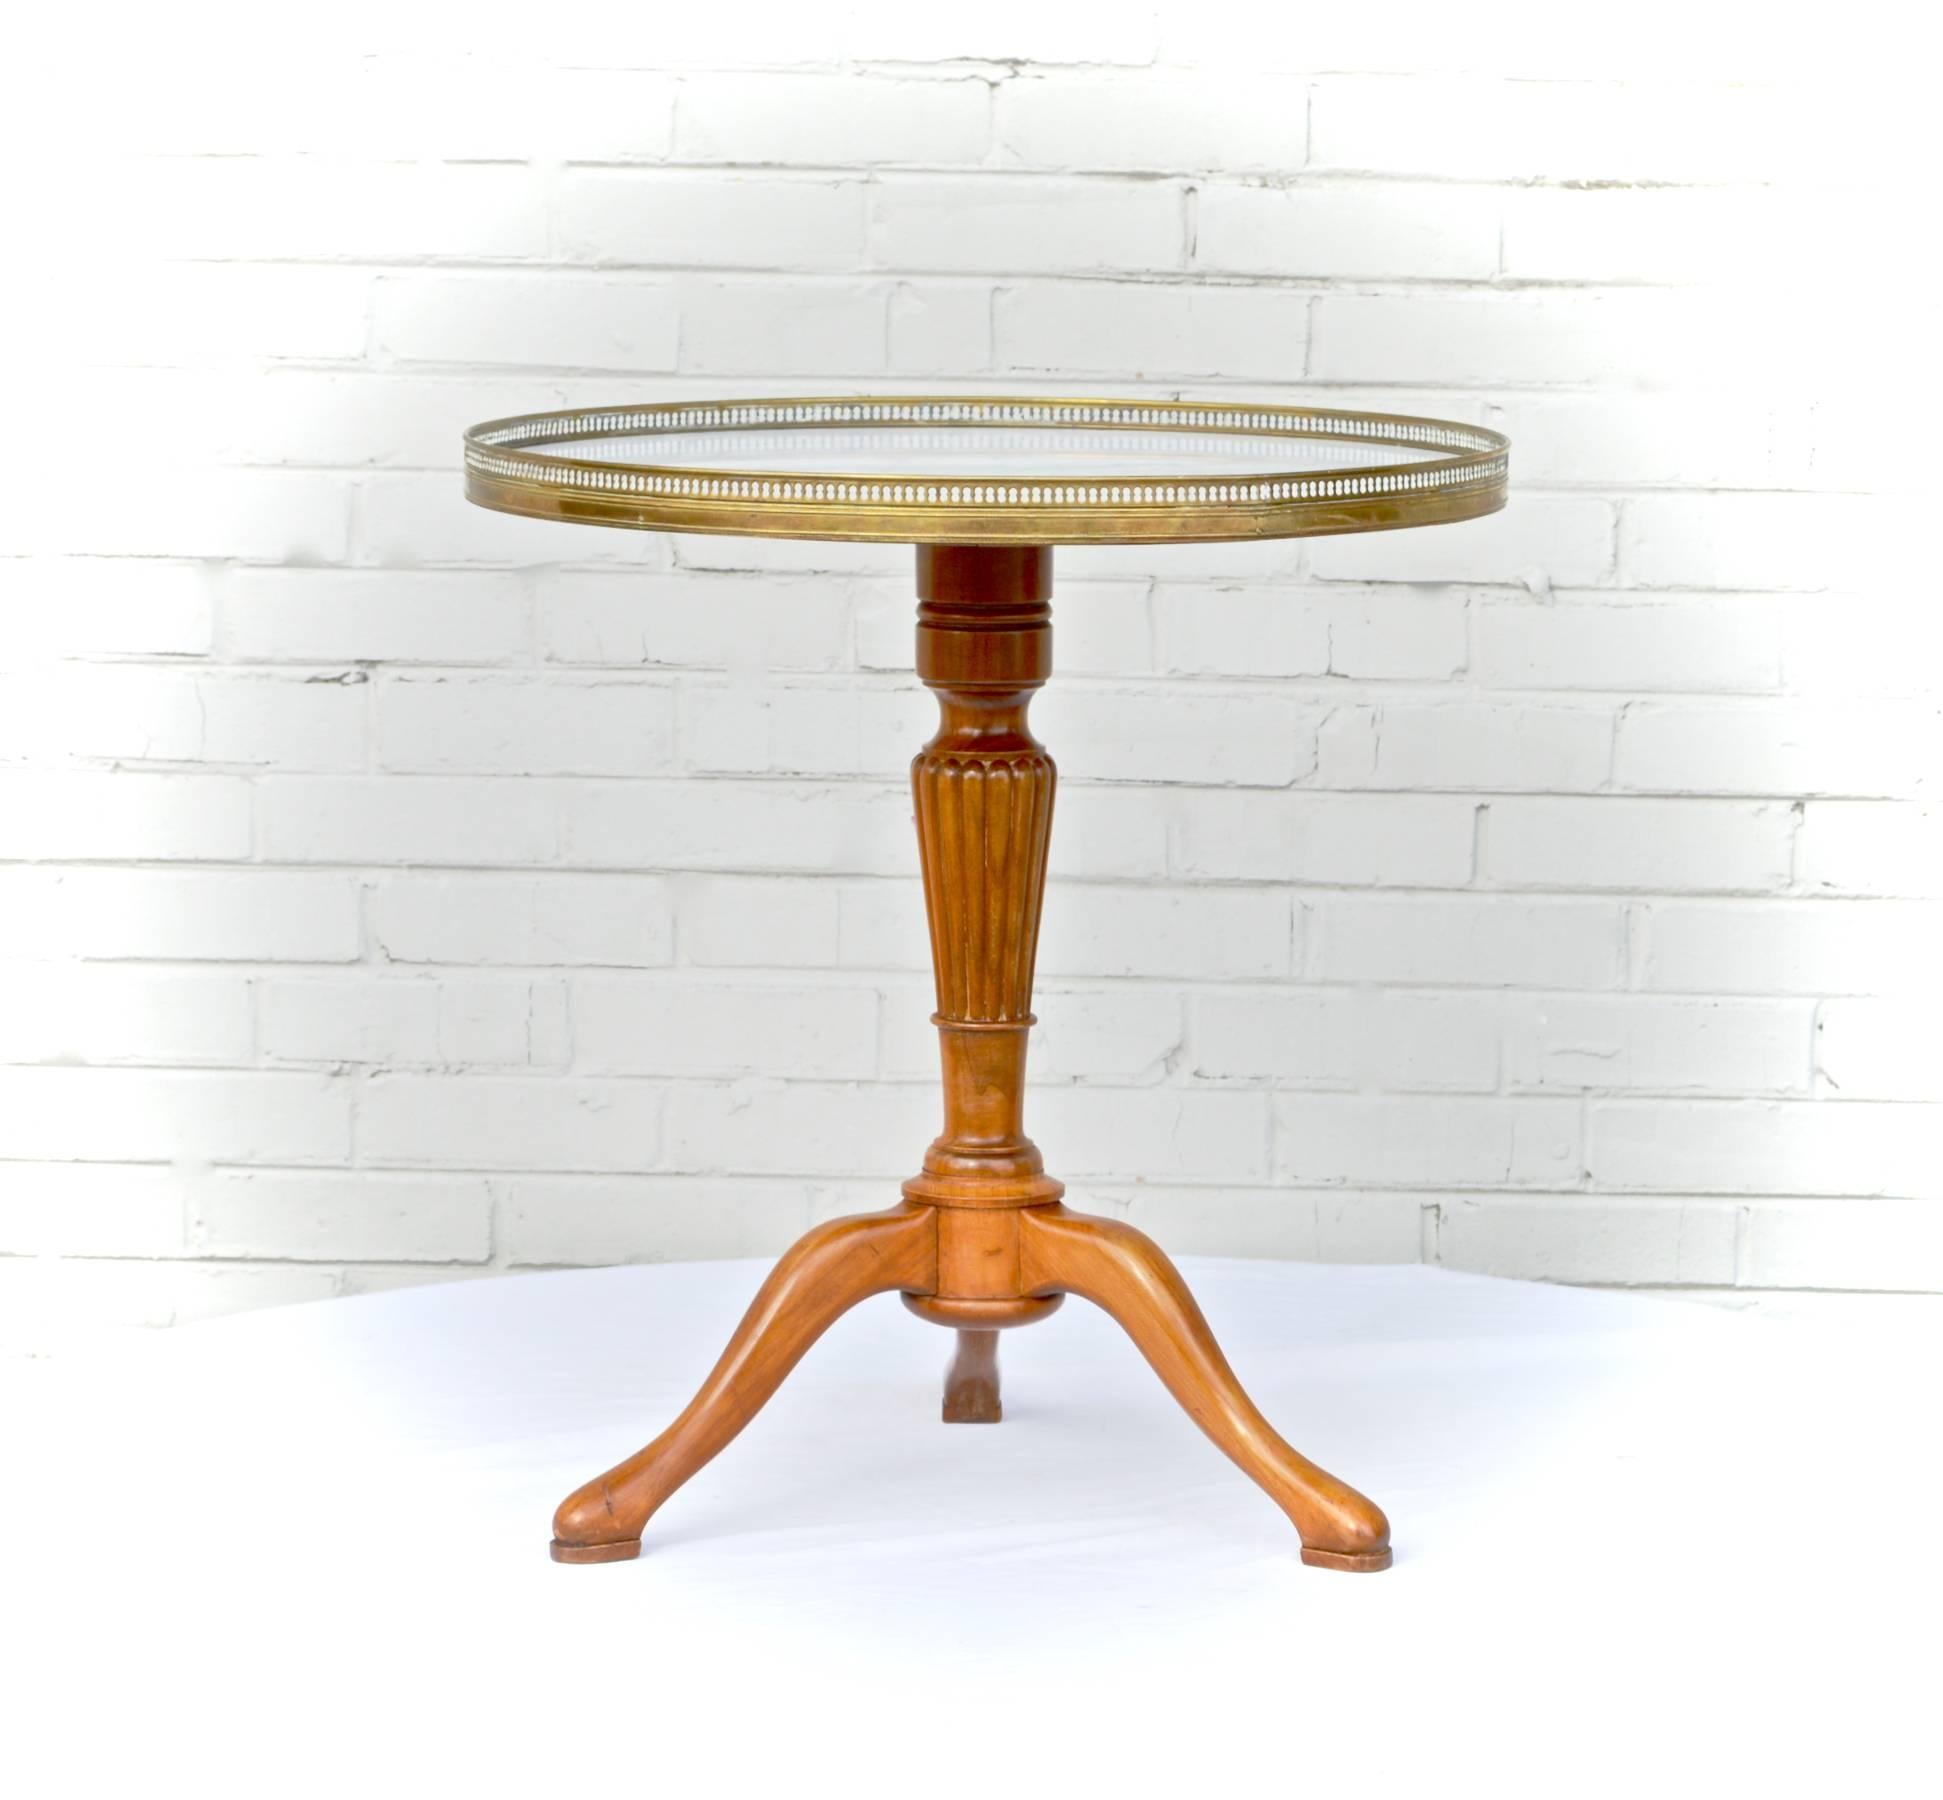 An outstanding gueridon table having a Carrara marble top, encircled by a finely cast brass gallery, which rest upon a tripod base of cherry. The base has a reeded trunk and delicate pad feet. Tabletop and table base are smartly connected by